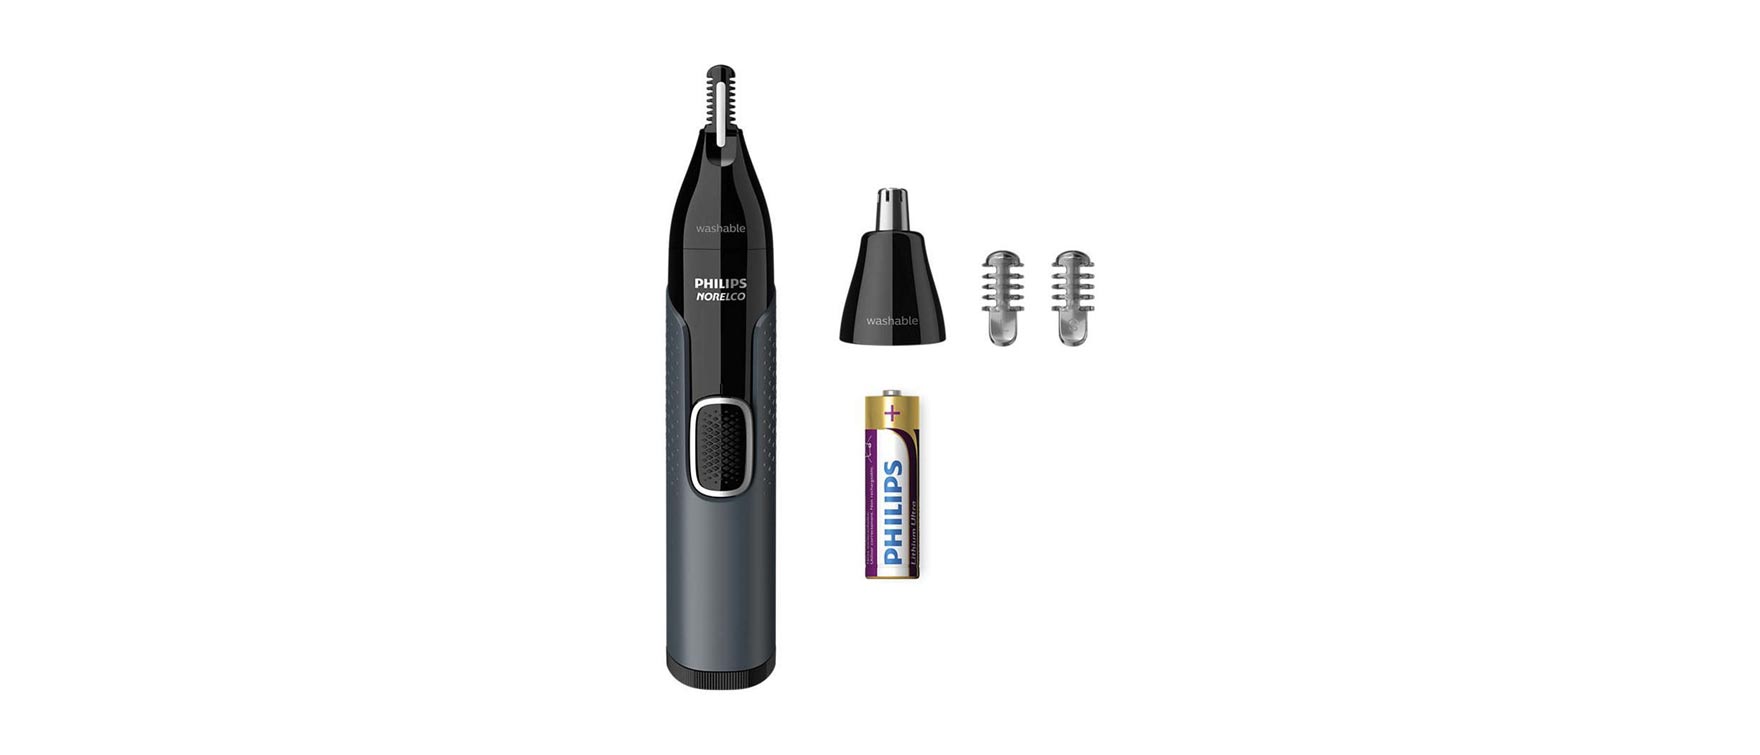 1. Philips Norelco Nose Trimmer